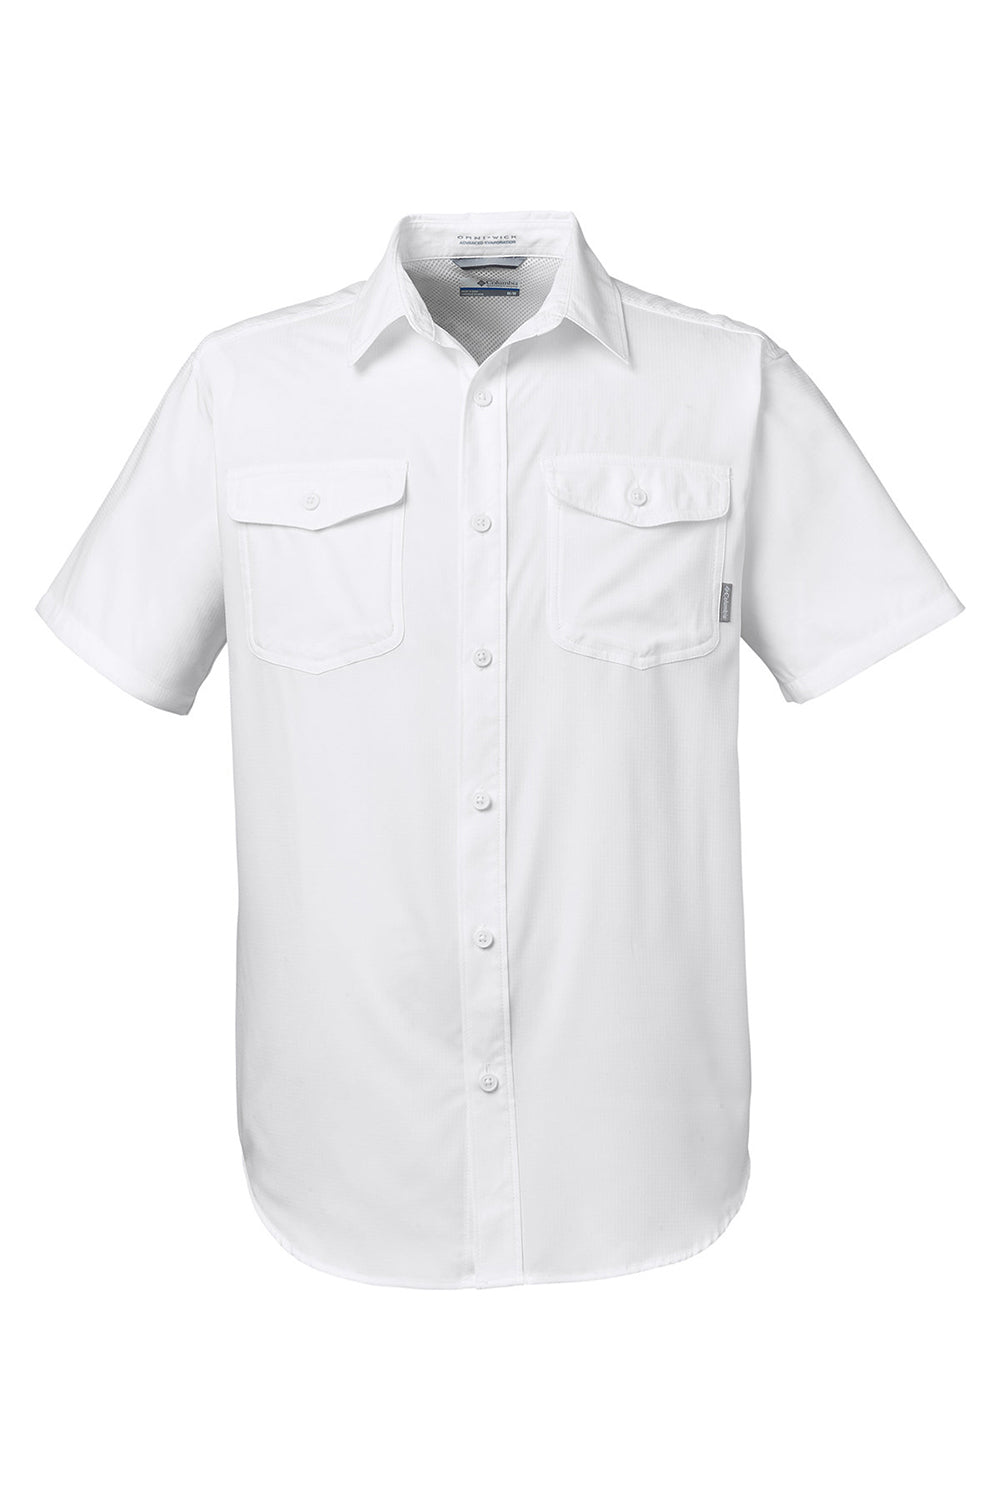 Columbia 1577761 Mens Utilizer II Short Sleeve Button Down Shirt White Flat Front